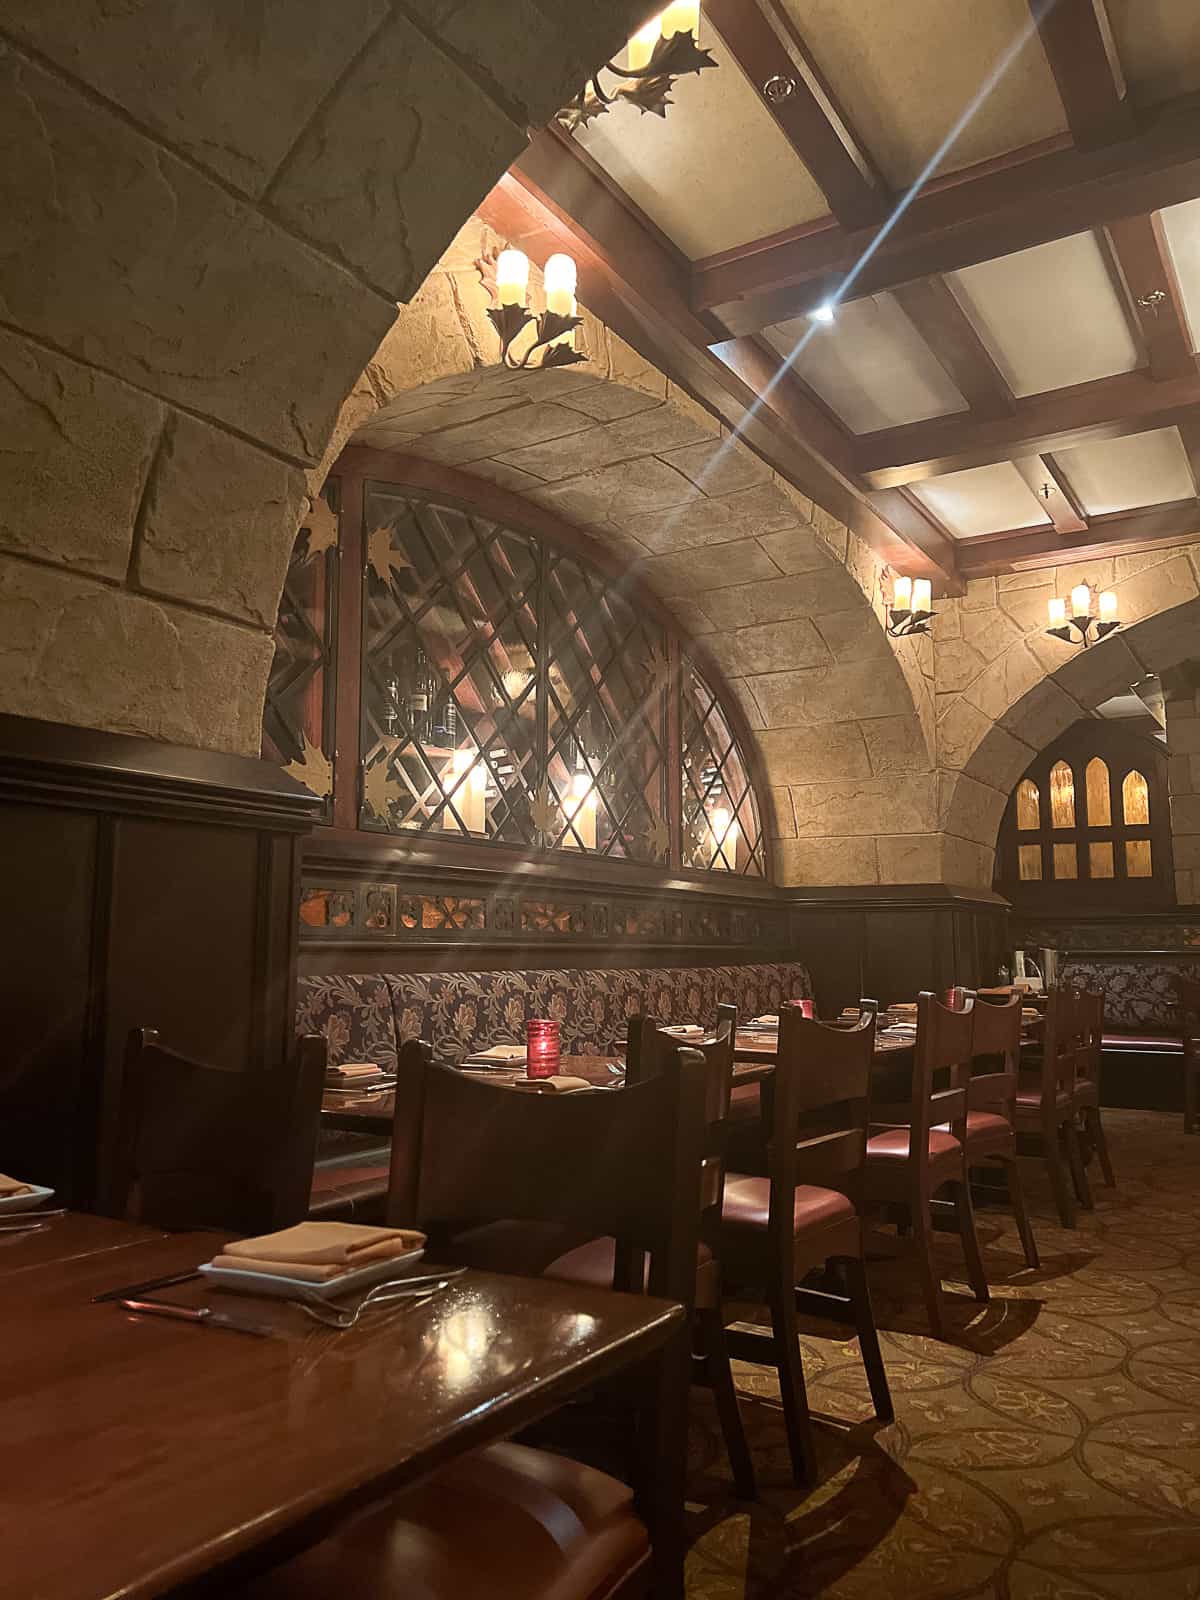 View Inside Le Cellier Restaurant in Canada Pavilion at Disney World Epcot Park